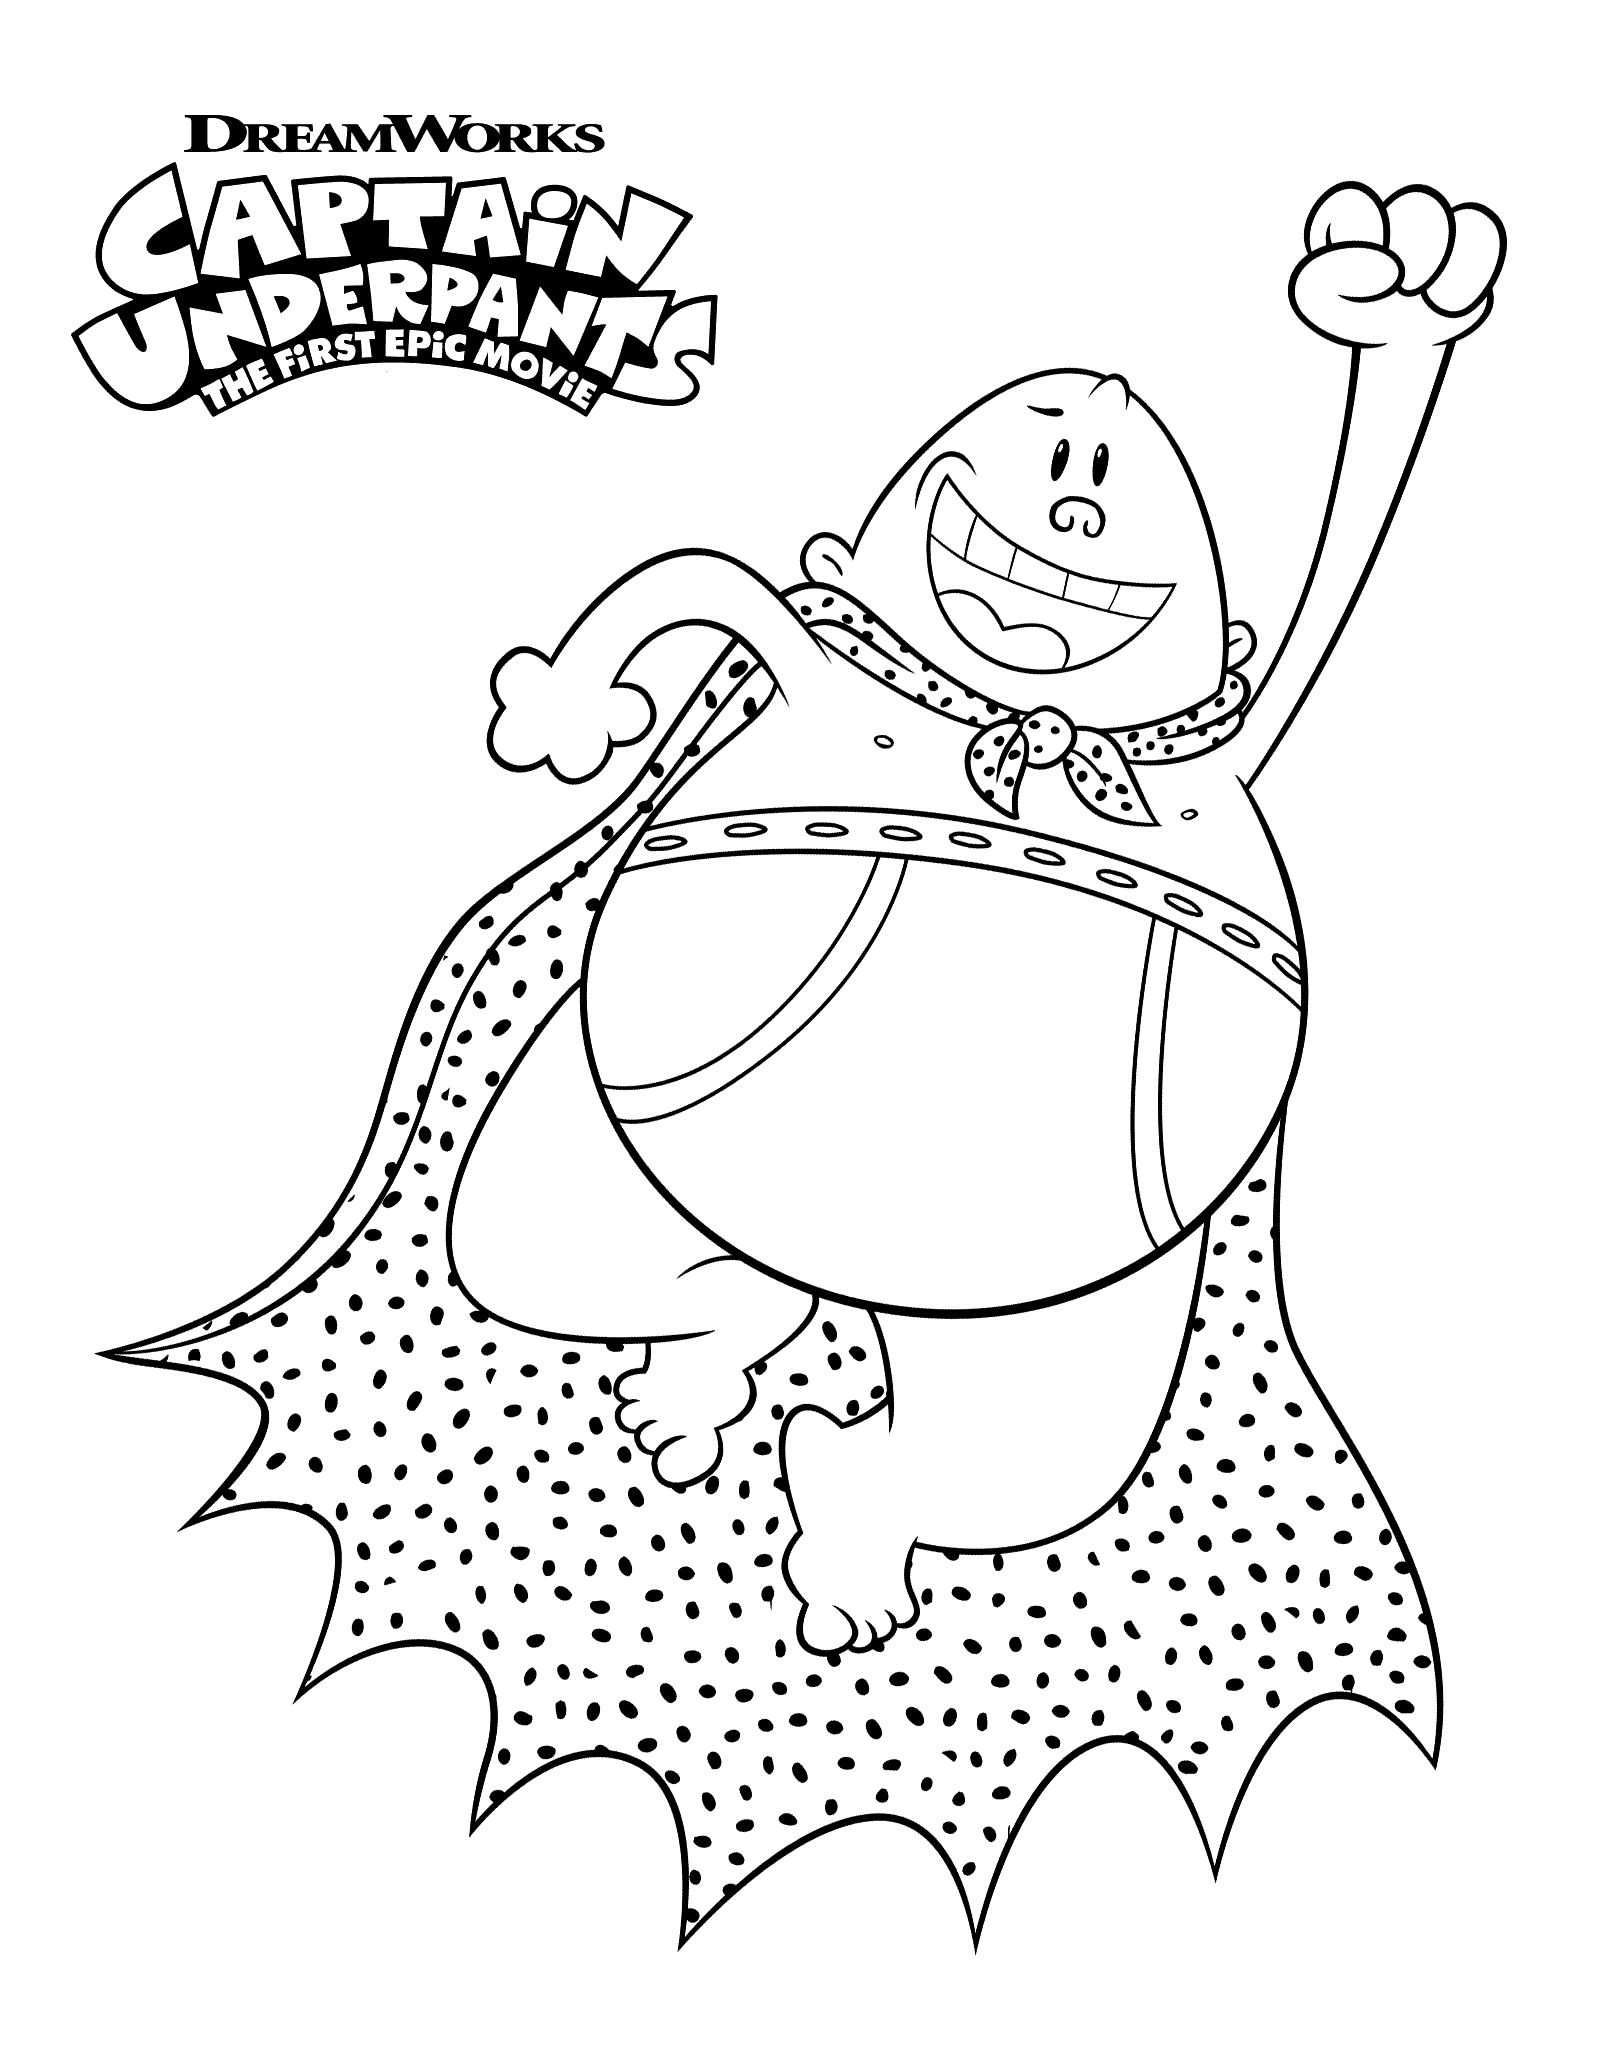 Captain Underpants Character Coloring Page